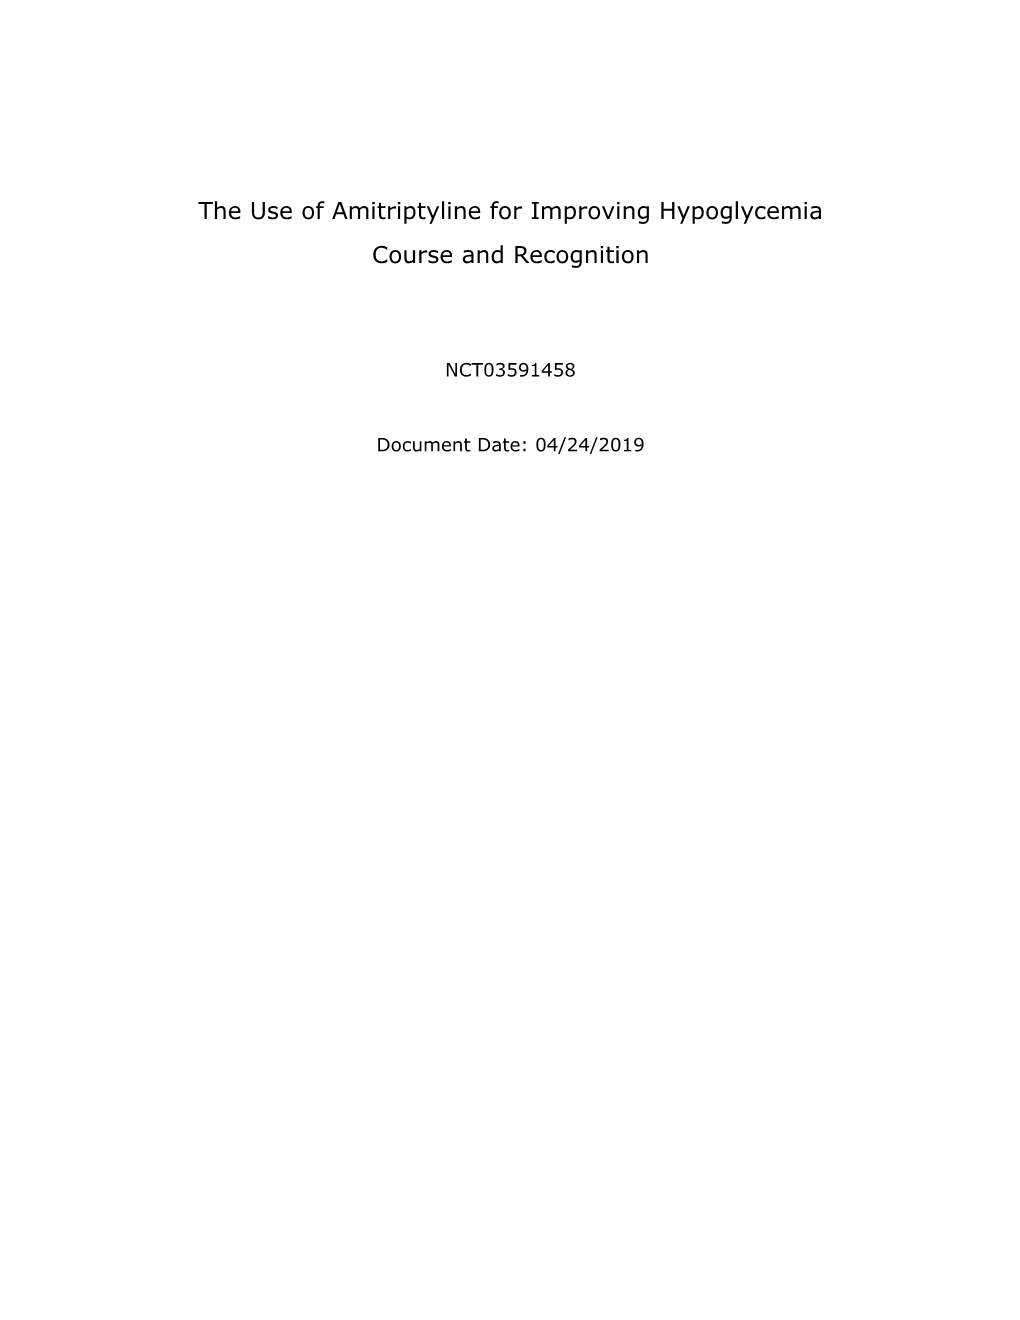 The Use of Amitriptyline for Improving Hypoglycemia Course and Recognition